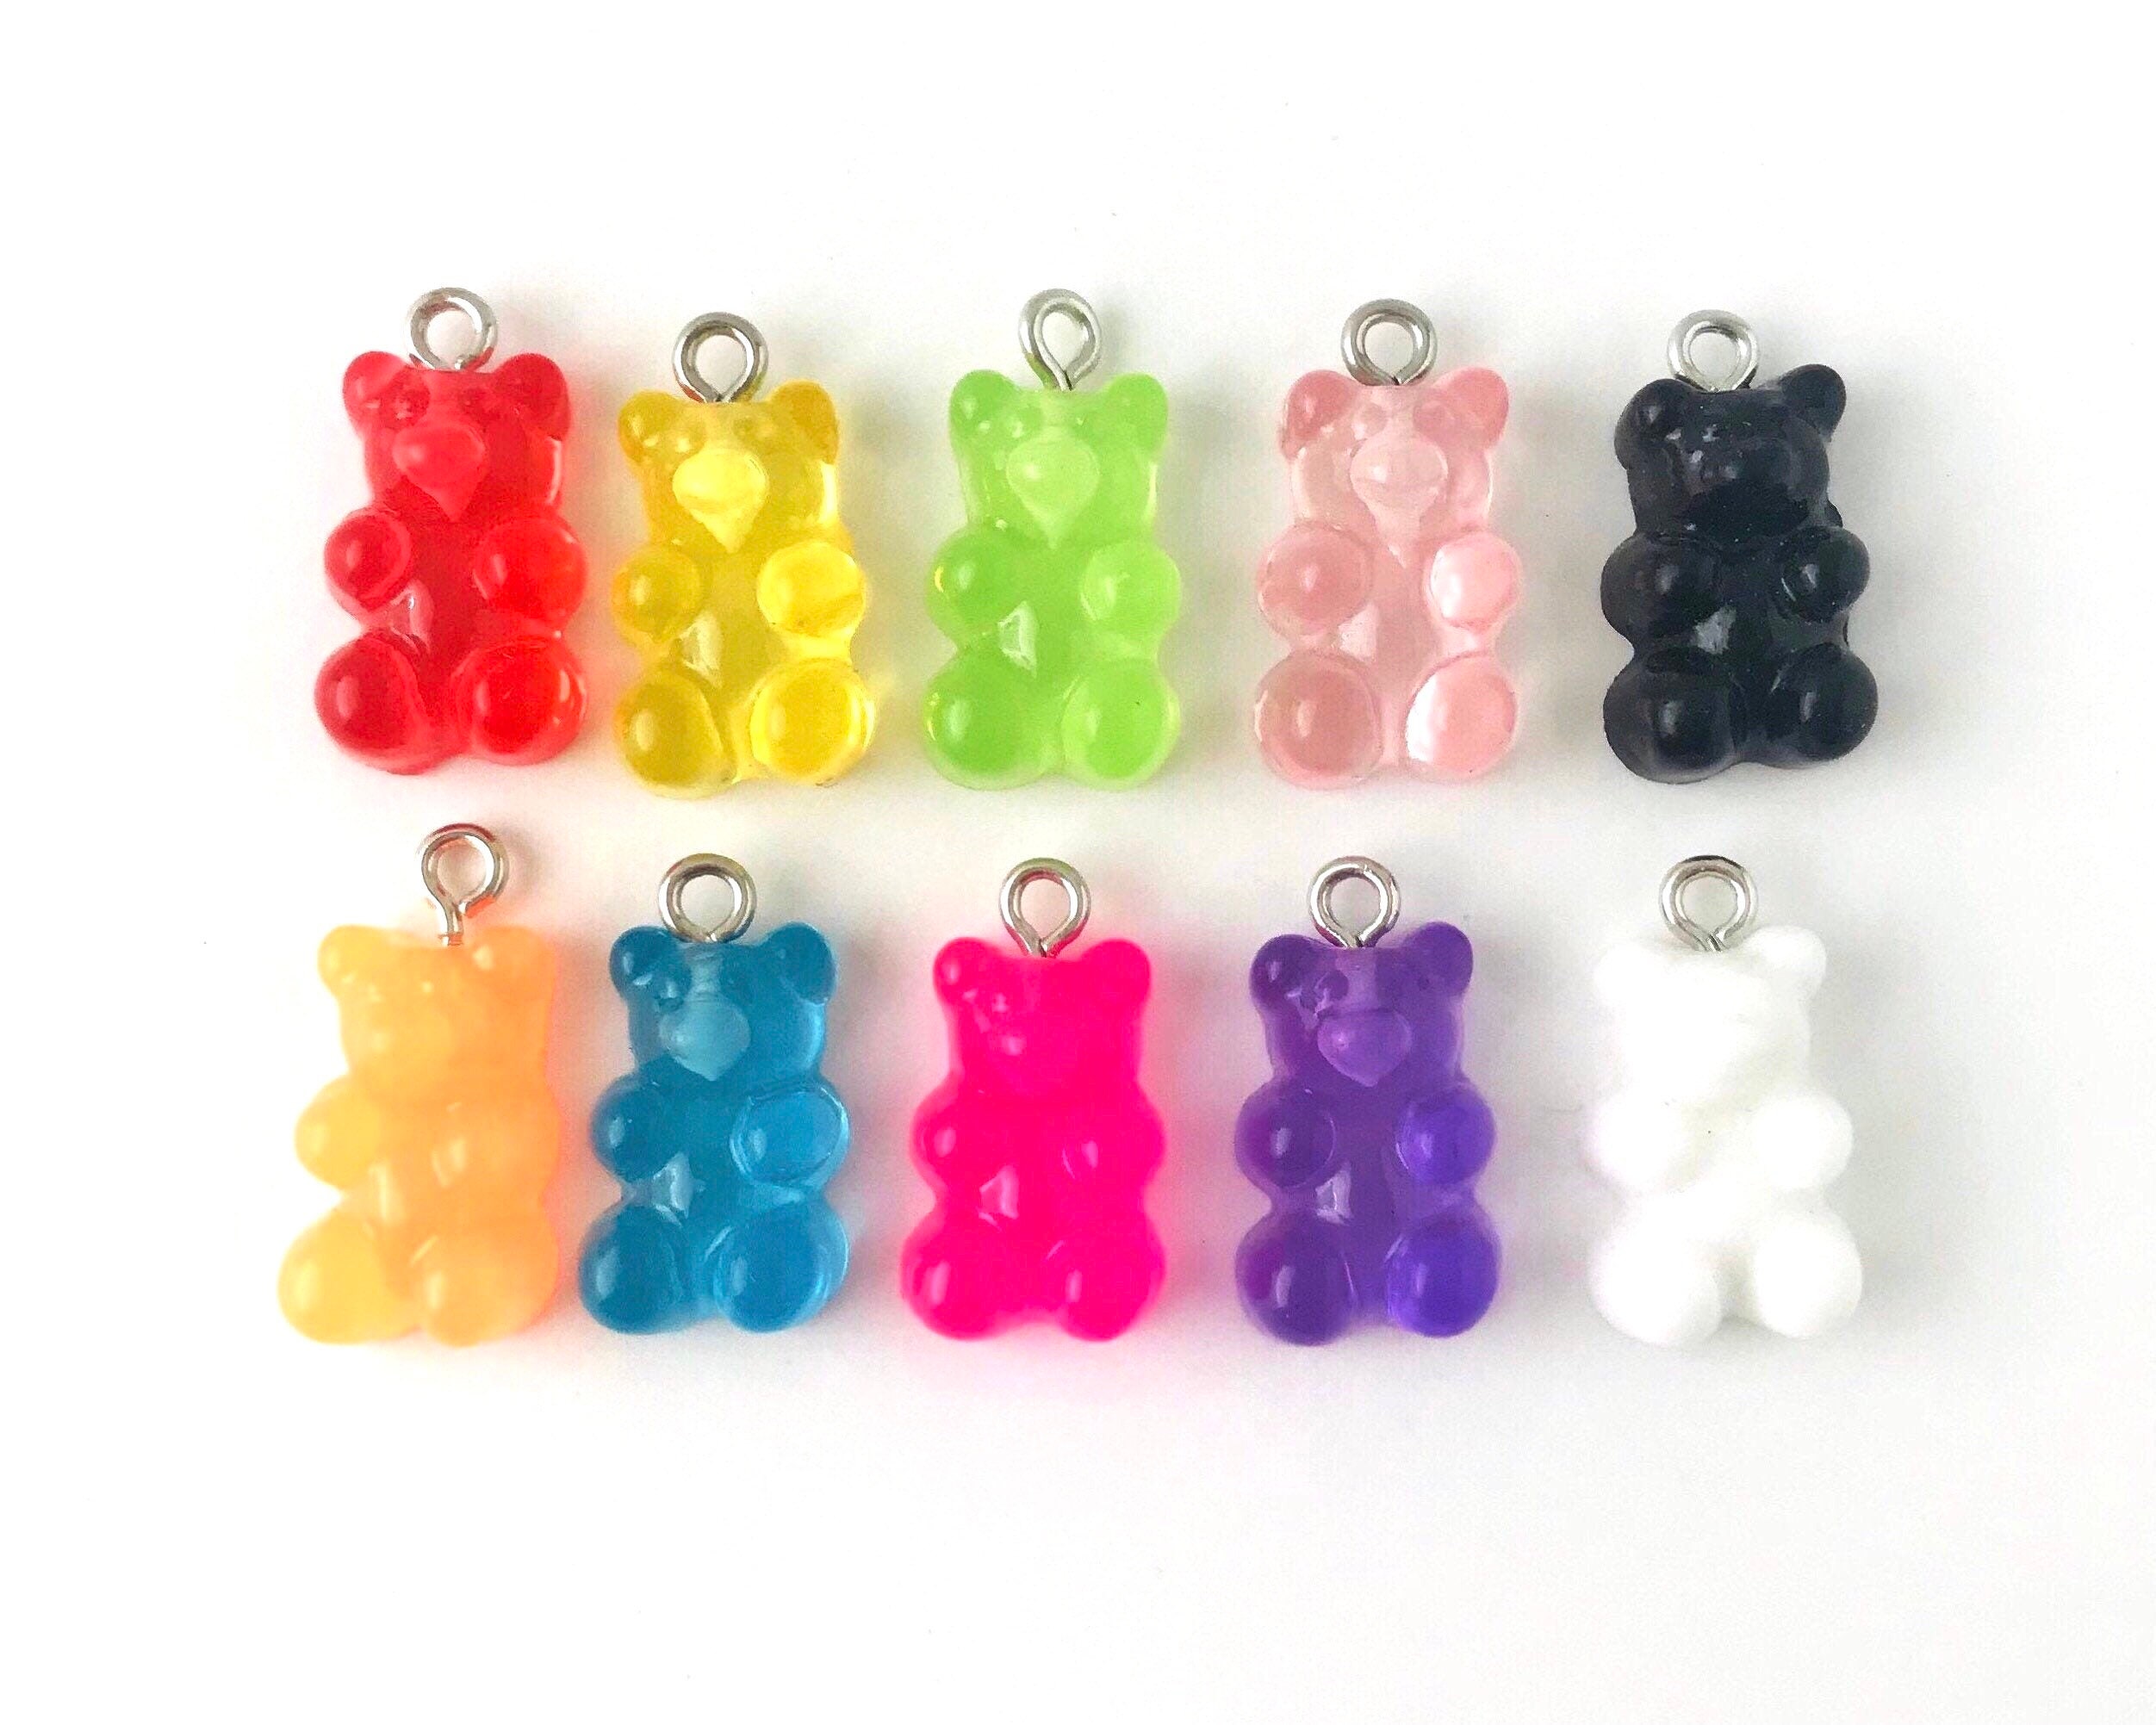 Fake Candy Gummy Bear Beads for Jewelry Making, Gummy Bear Charms